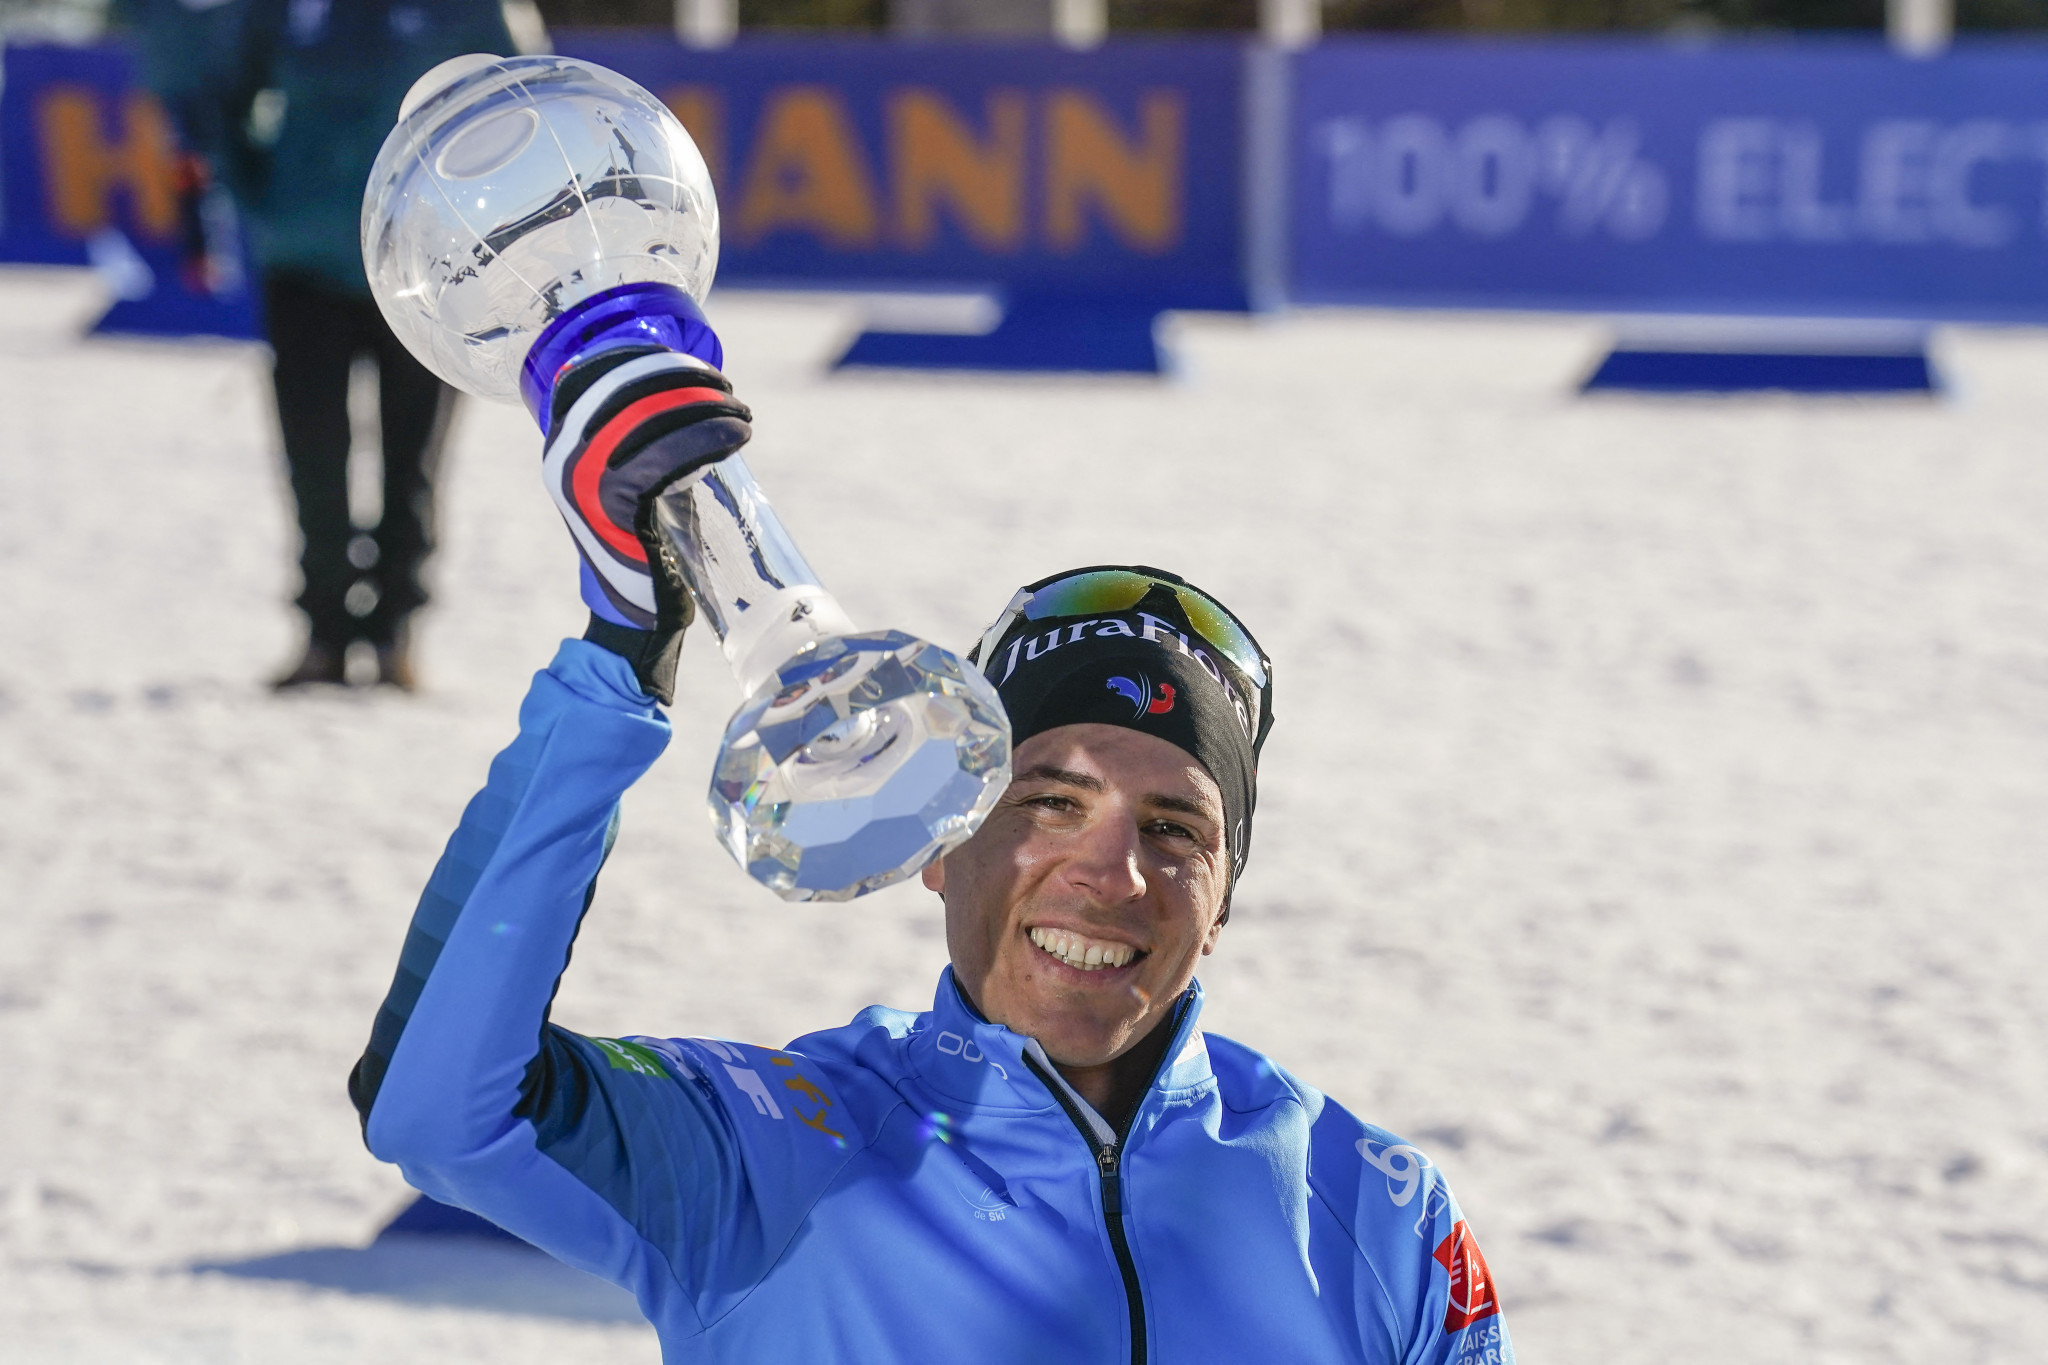 Quentin Fillon Maillet of France is tipped for the Crystal Globe again ©Getty Images